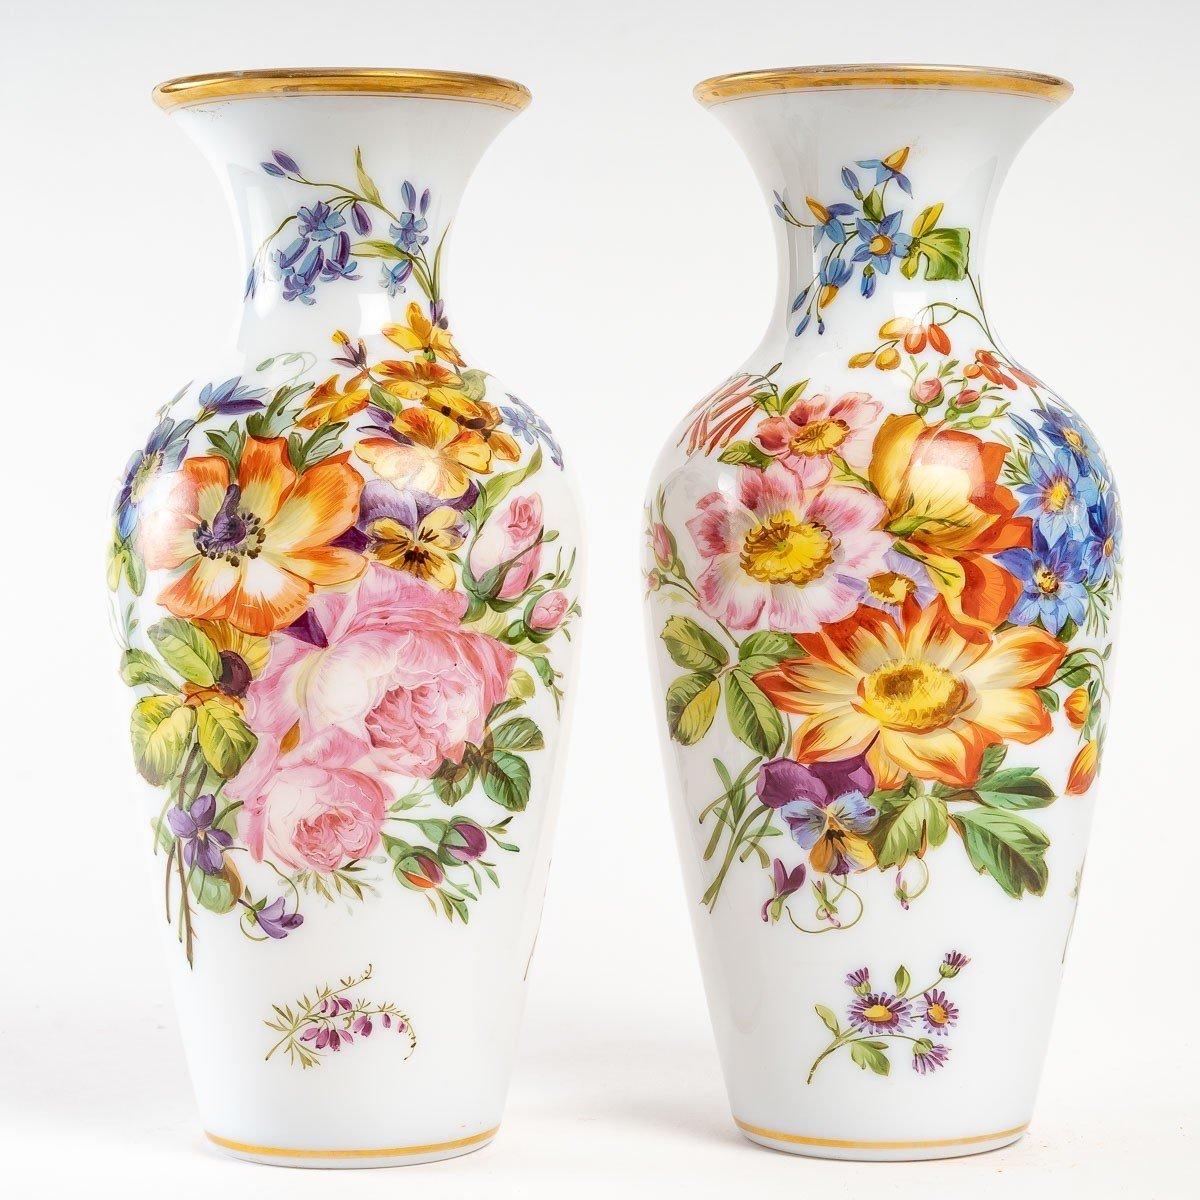 19th Century Pair of Opaline Vases by Baccarat, Napoleon III Period